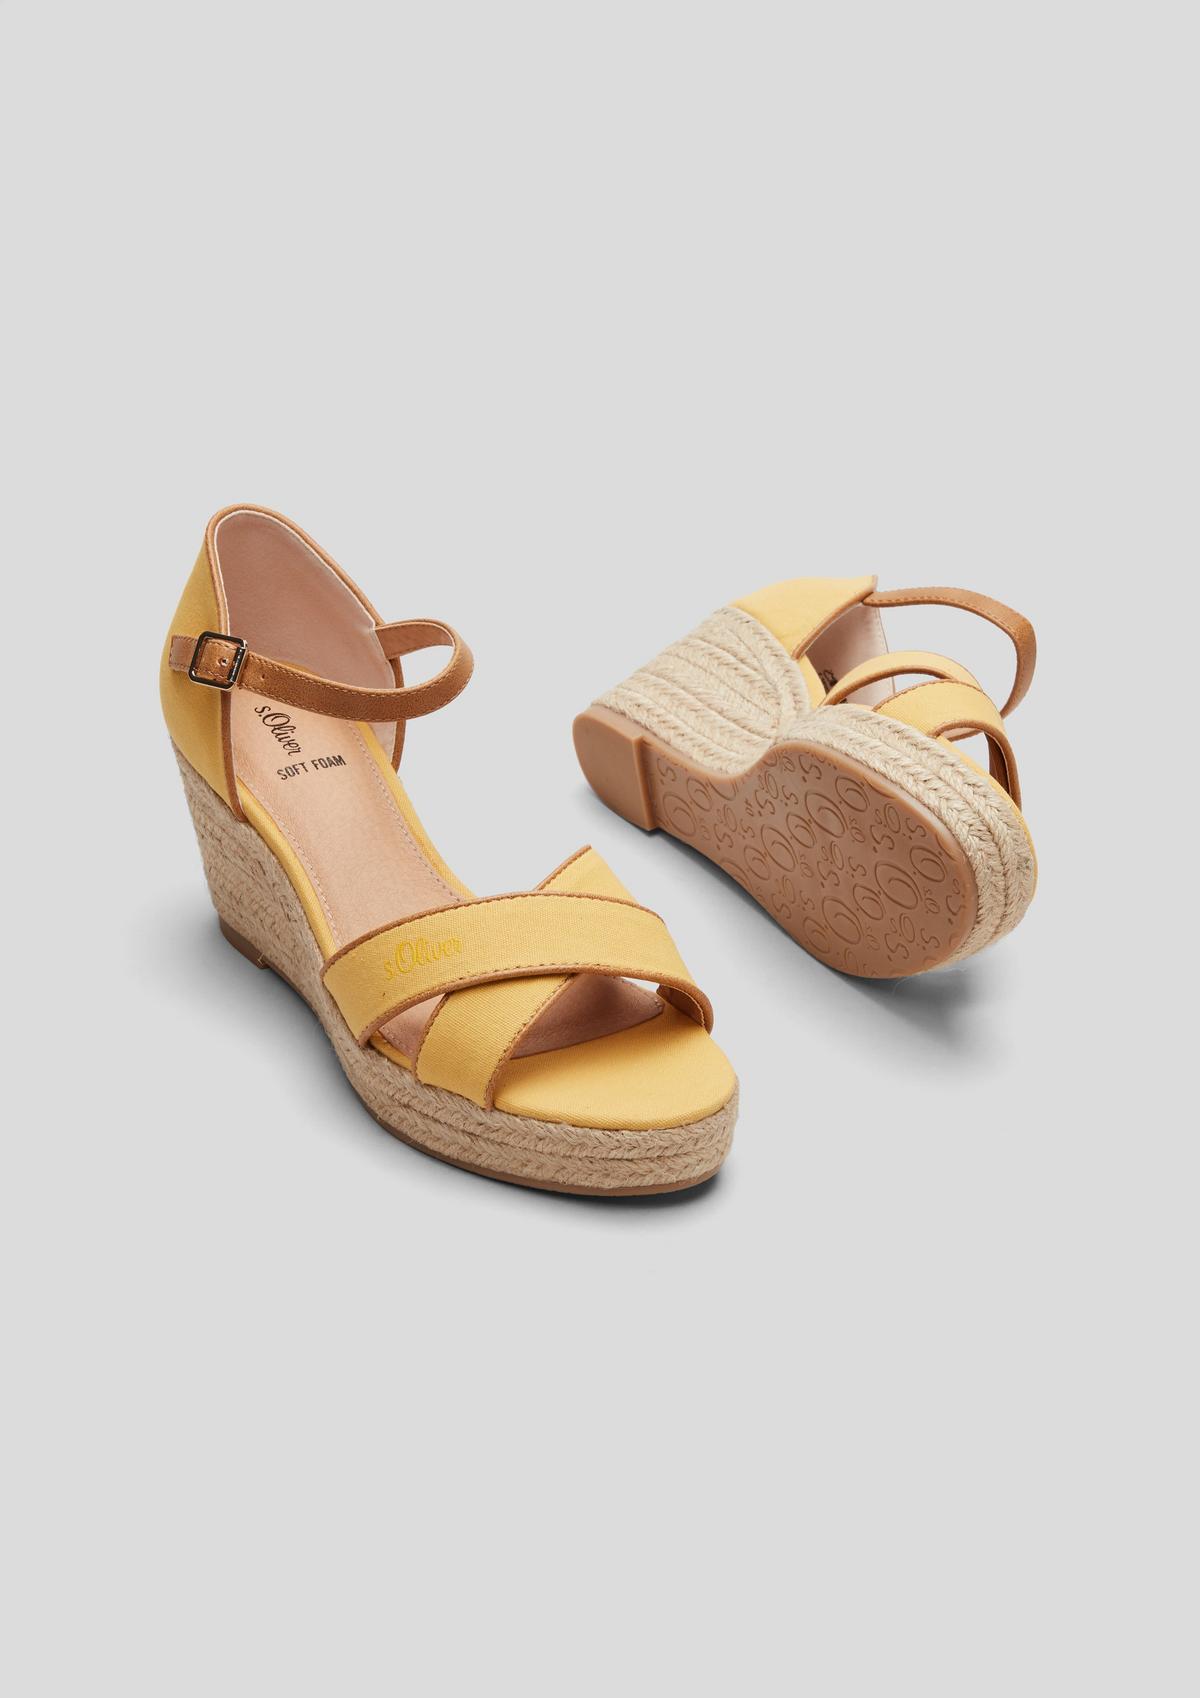 s.Oliver Wedges im Materialmix